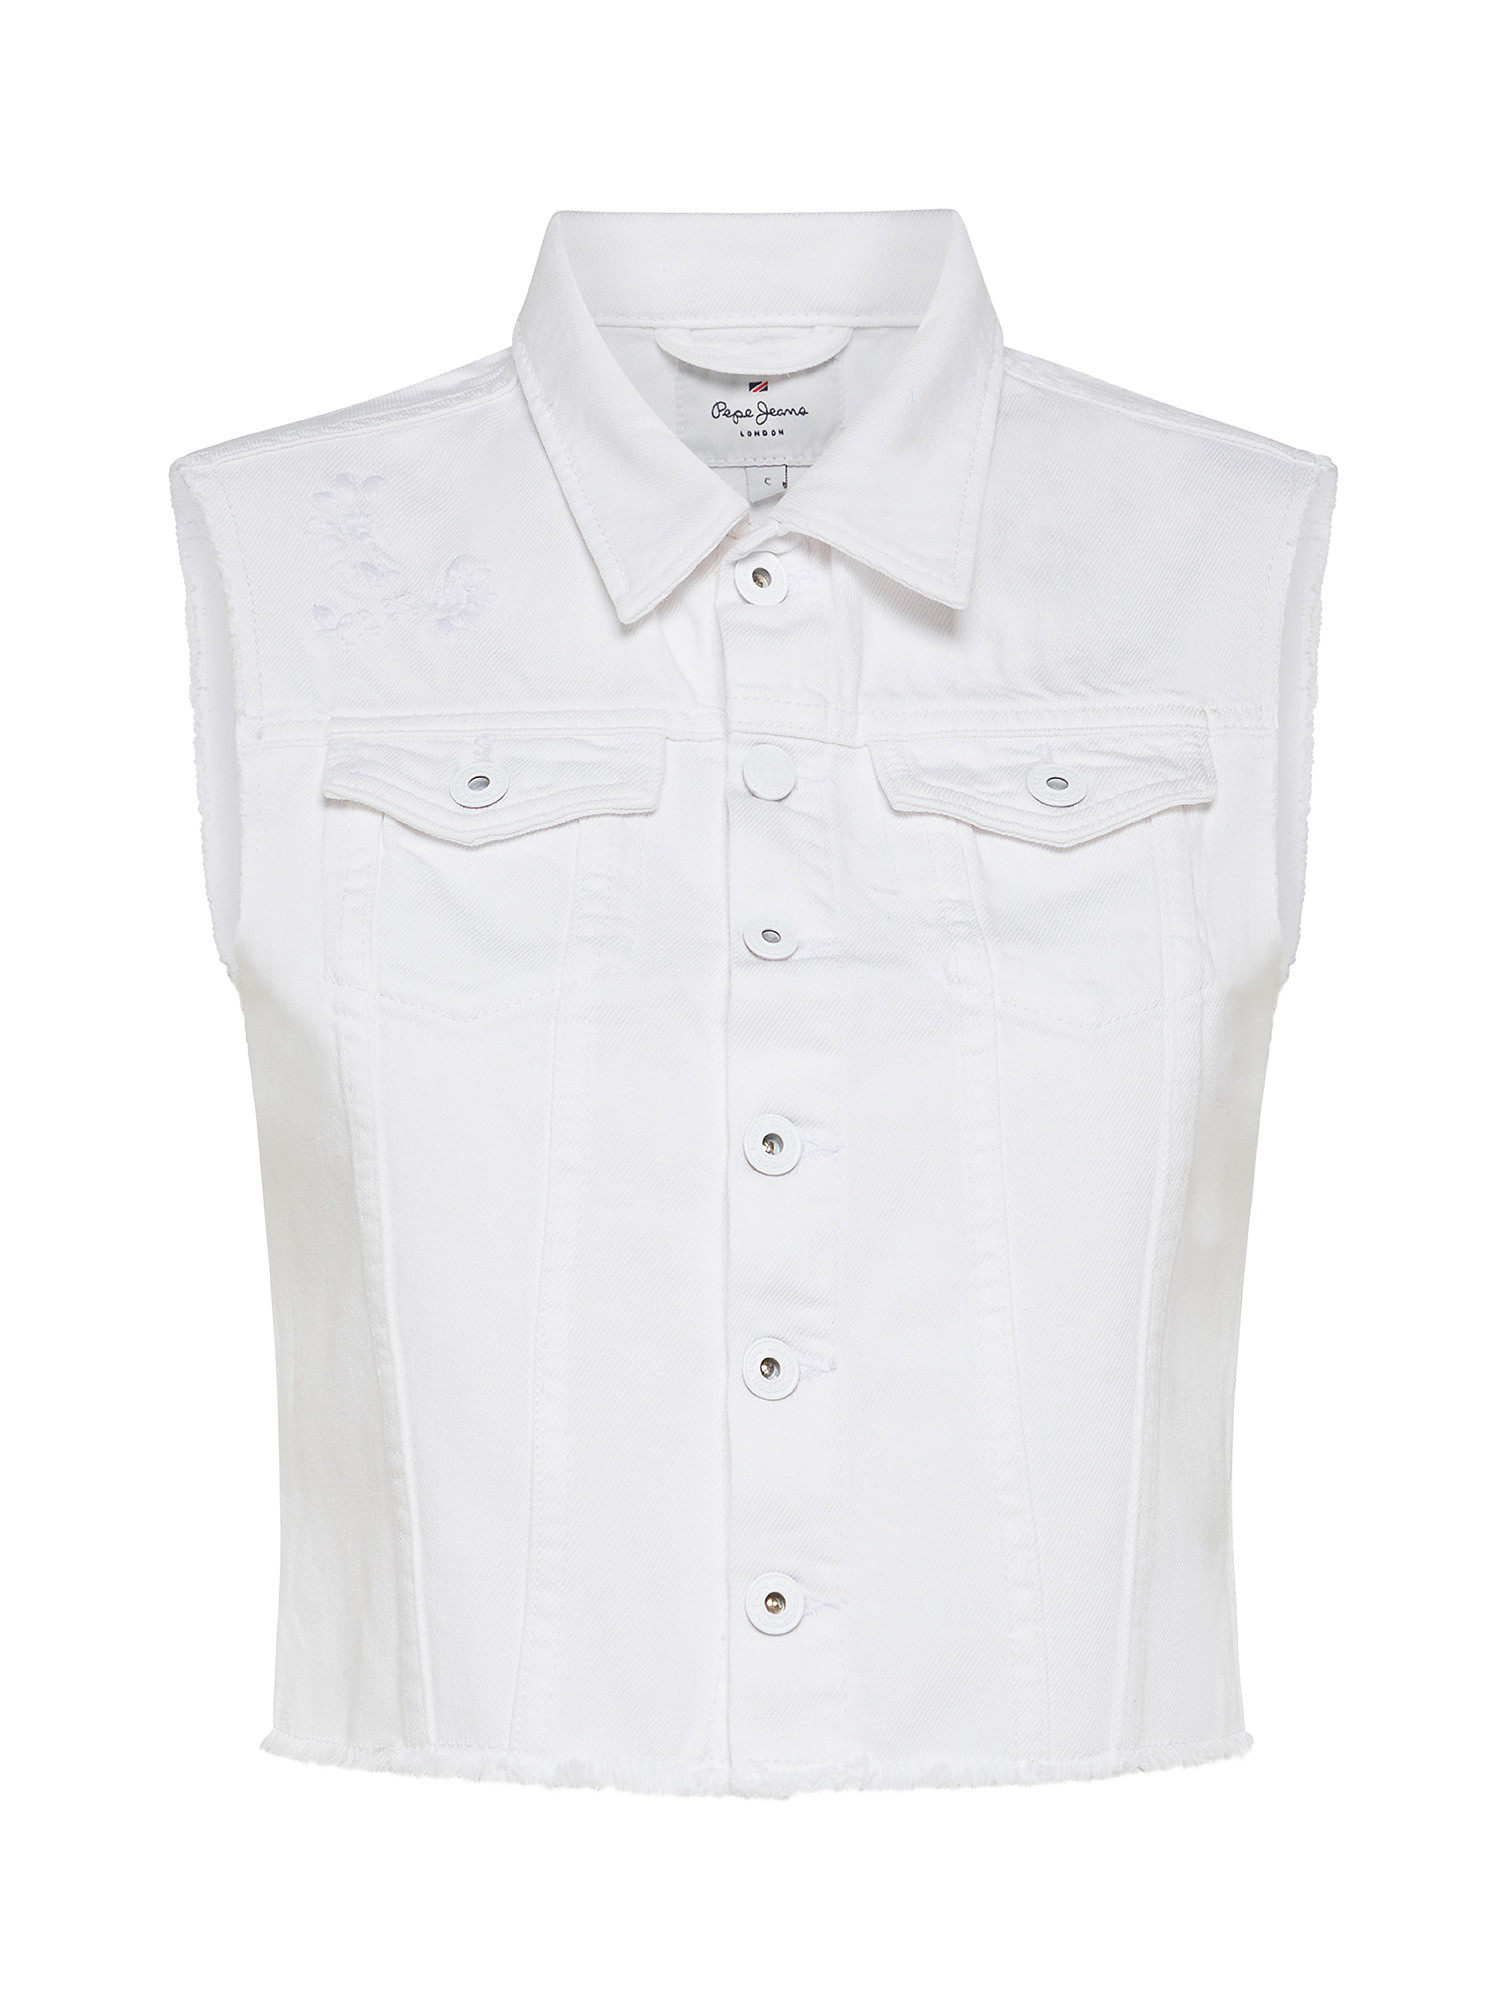 Pepe Jeans - Giacca smanicata in denim, Bianco, large image number 0